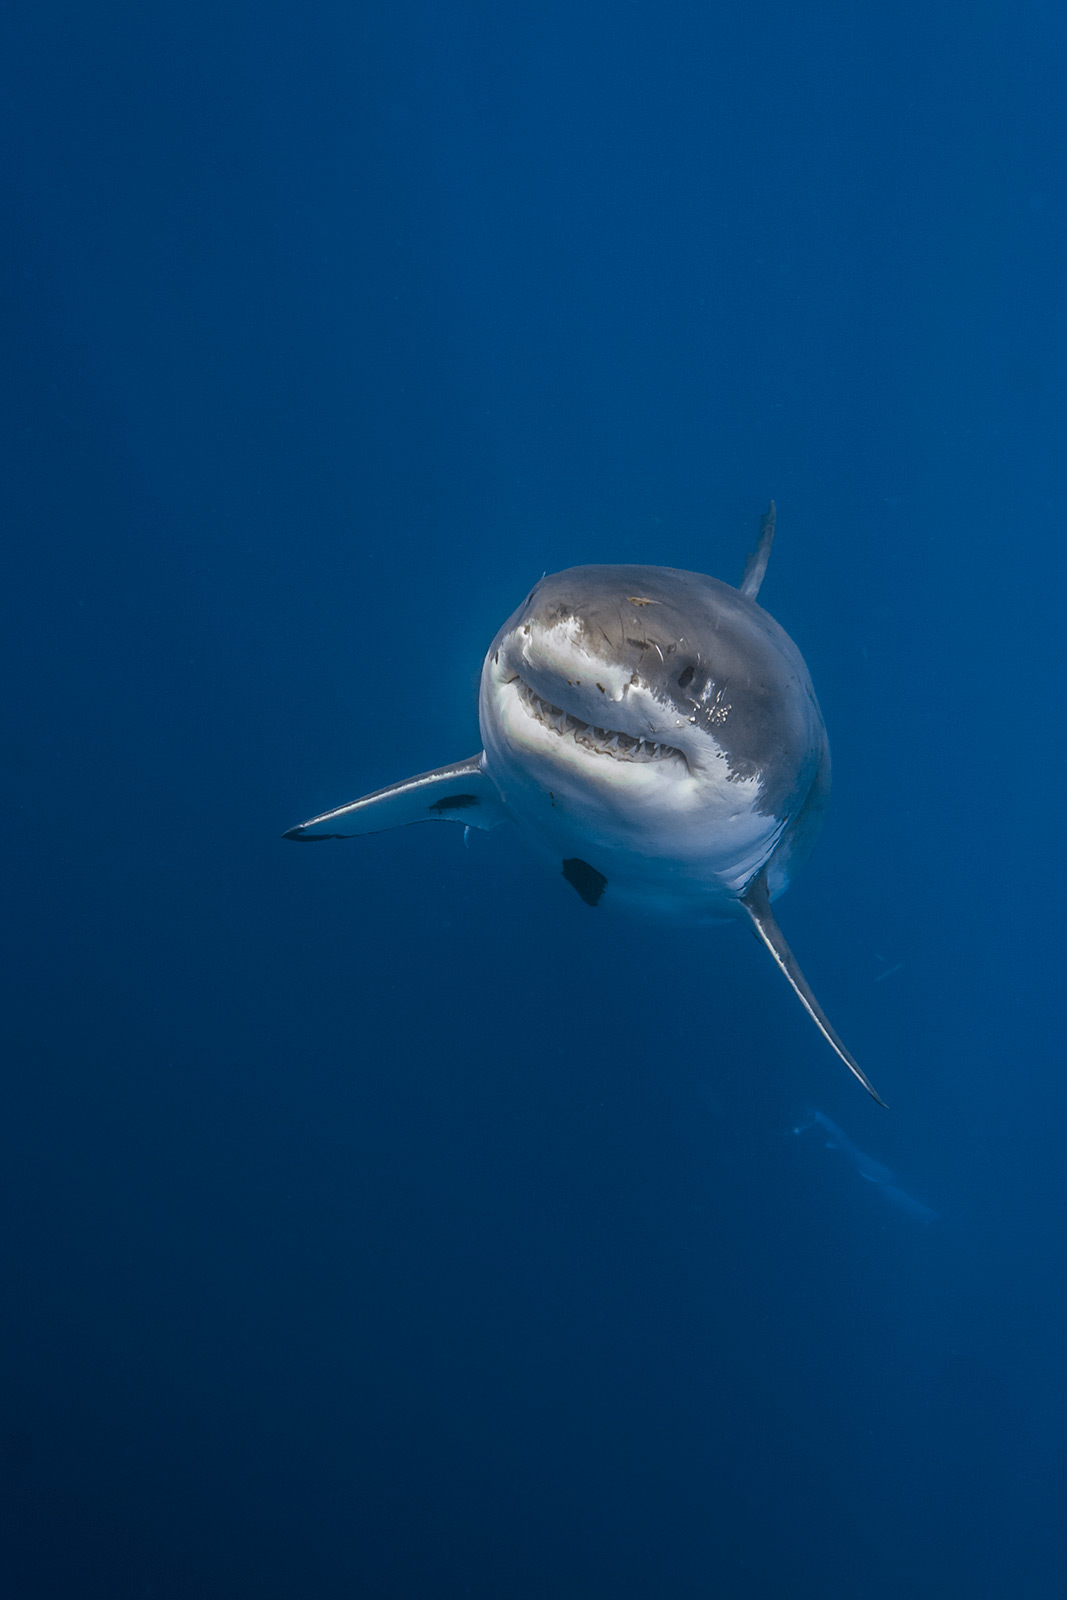 Cal Ripfin, a male great white shark, rises from the depths below image